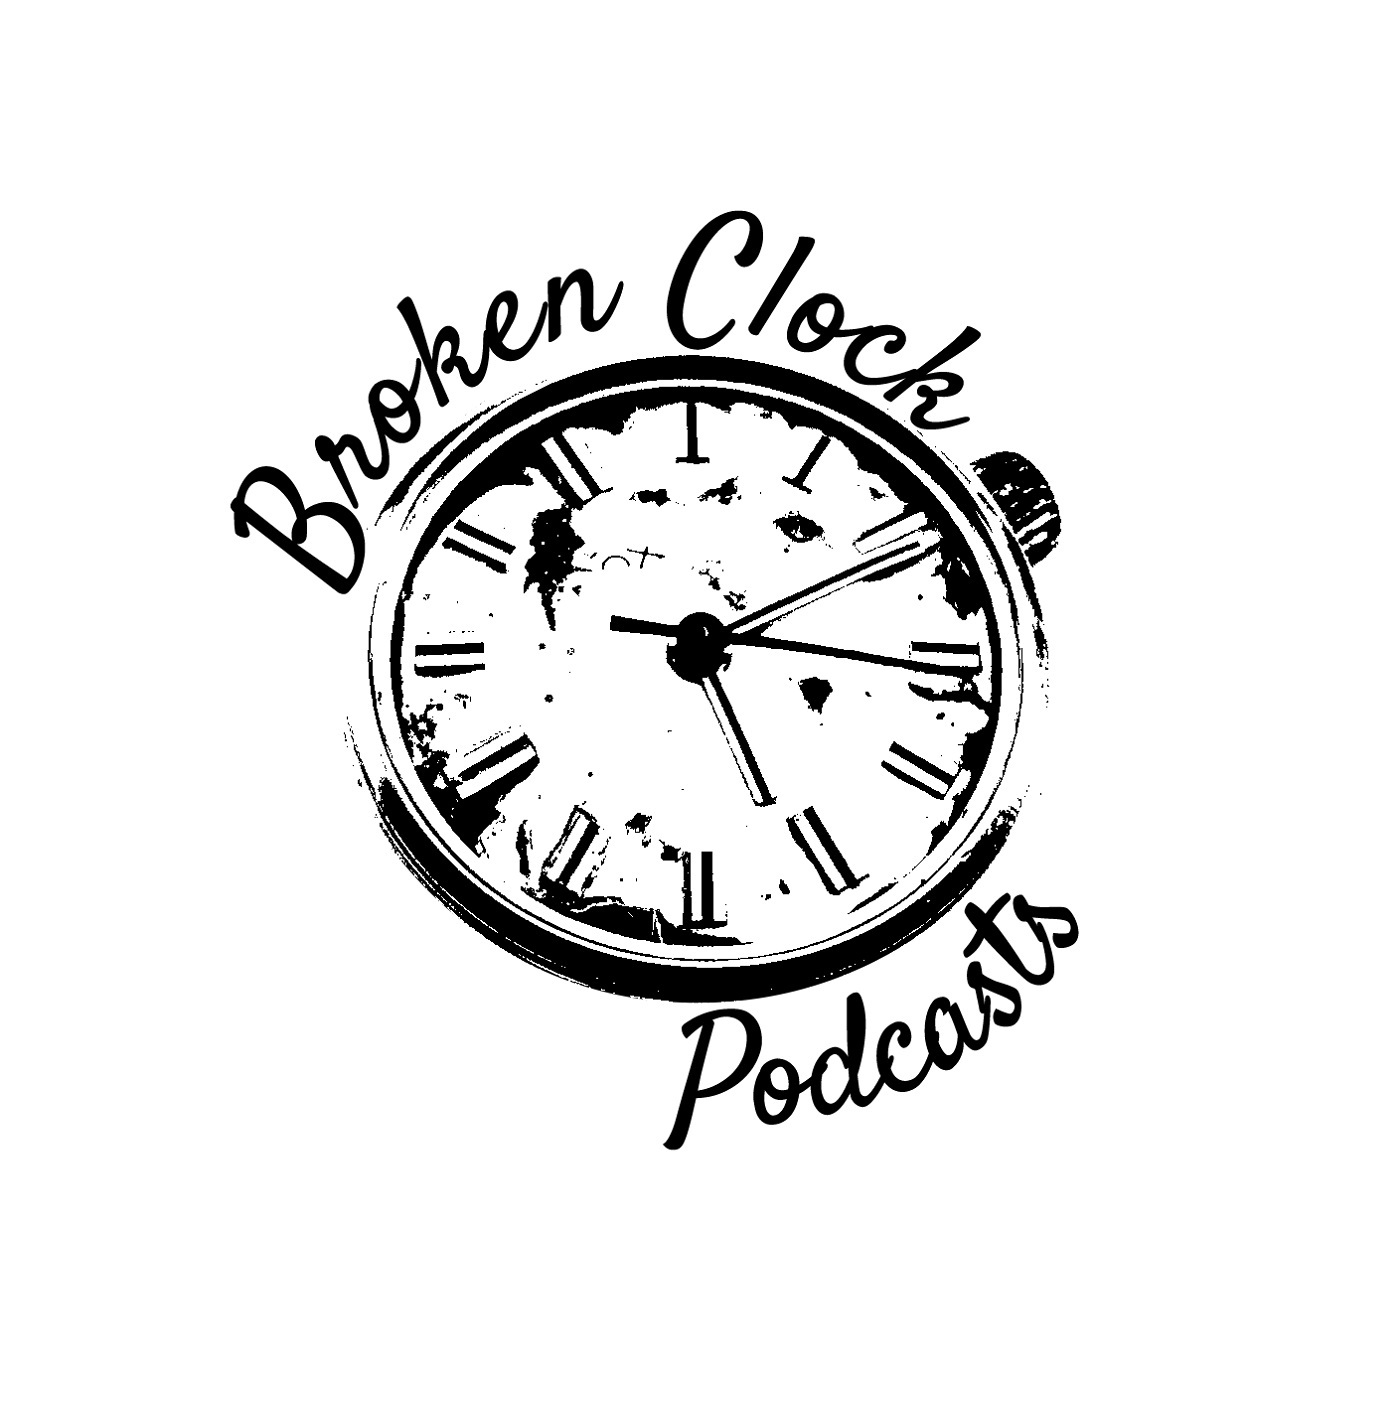 Broken Clock Gamescast Episode 14 - Teasers, Leaks, Delays, and Lots and Lots of Punching